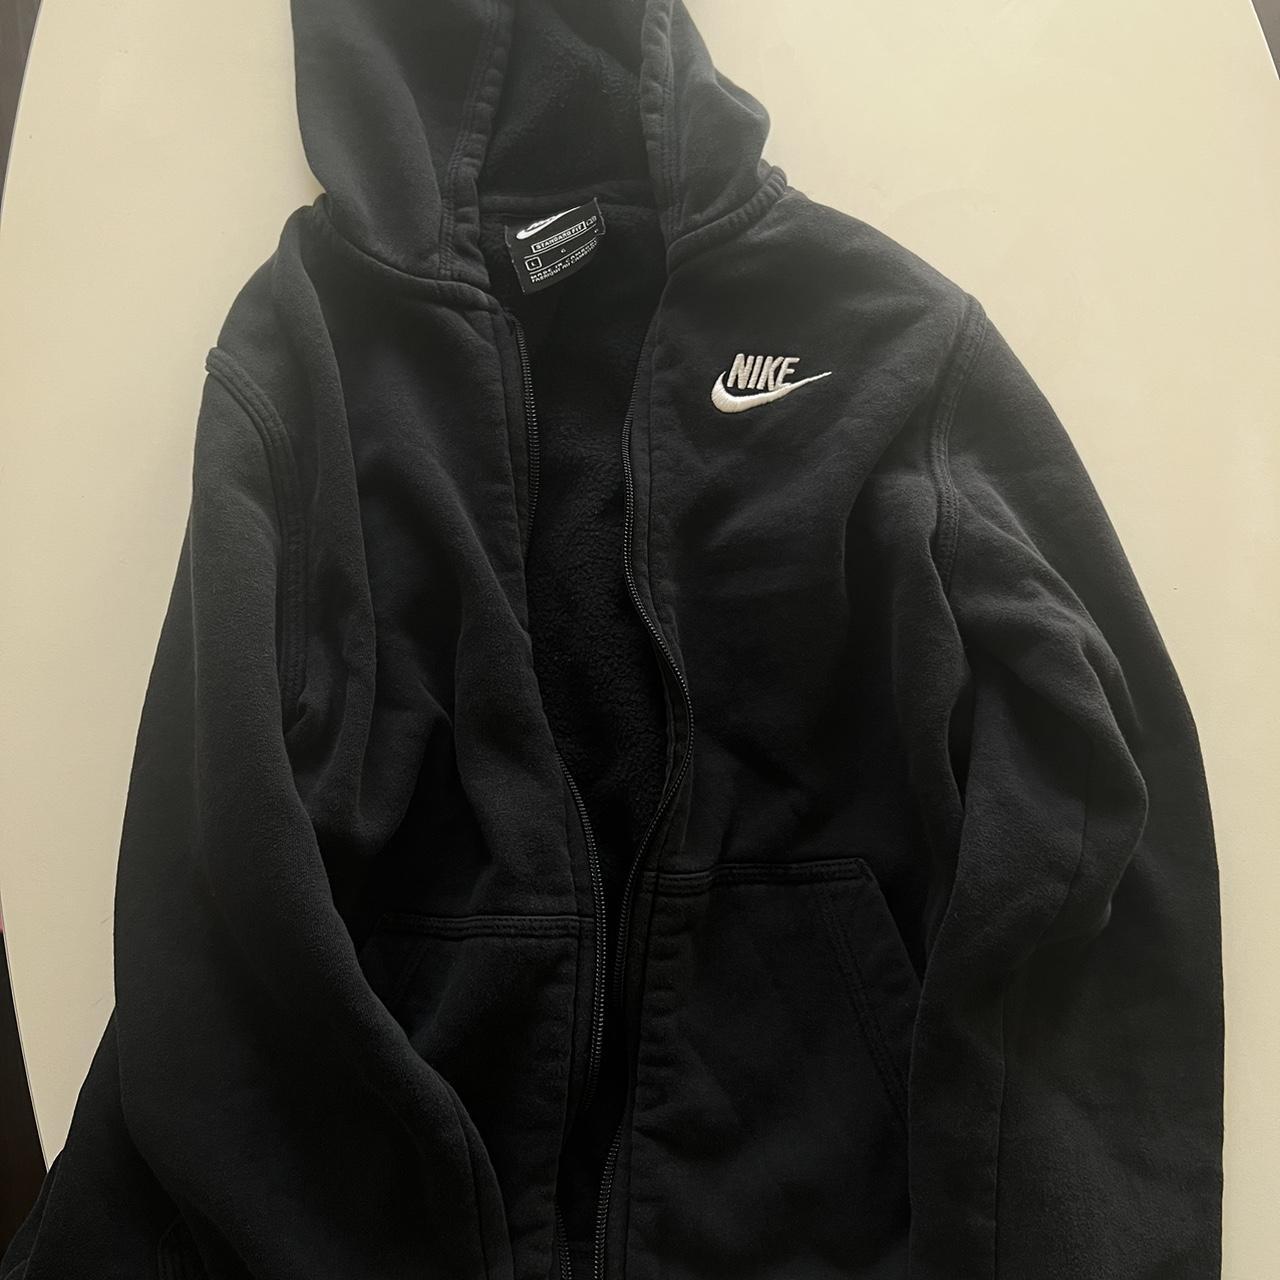 Vintage Nike Zip up Youth Size Large but can fit a... - Depop